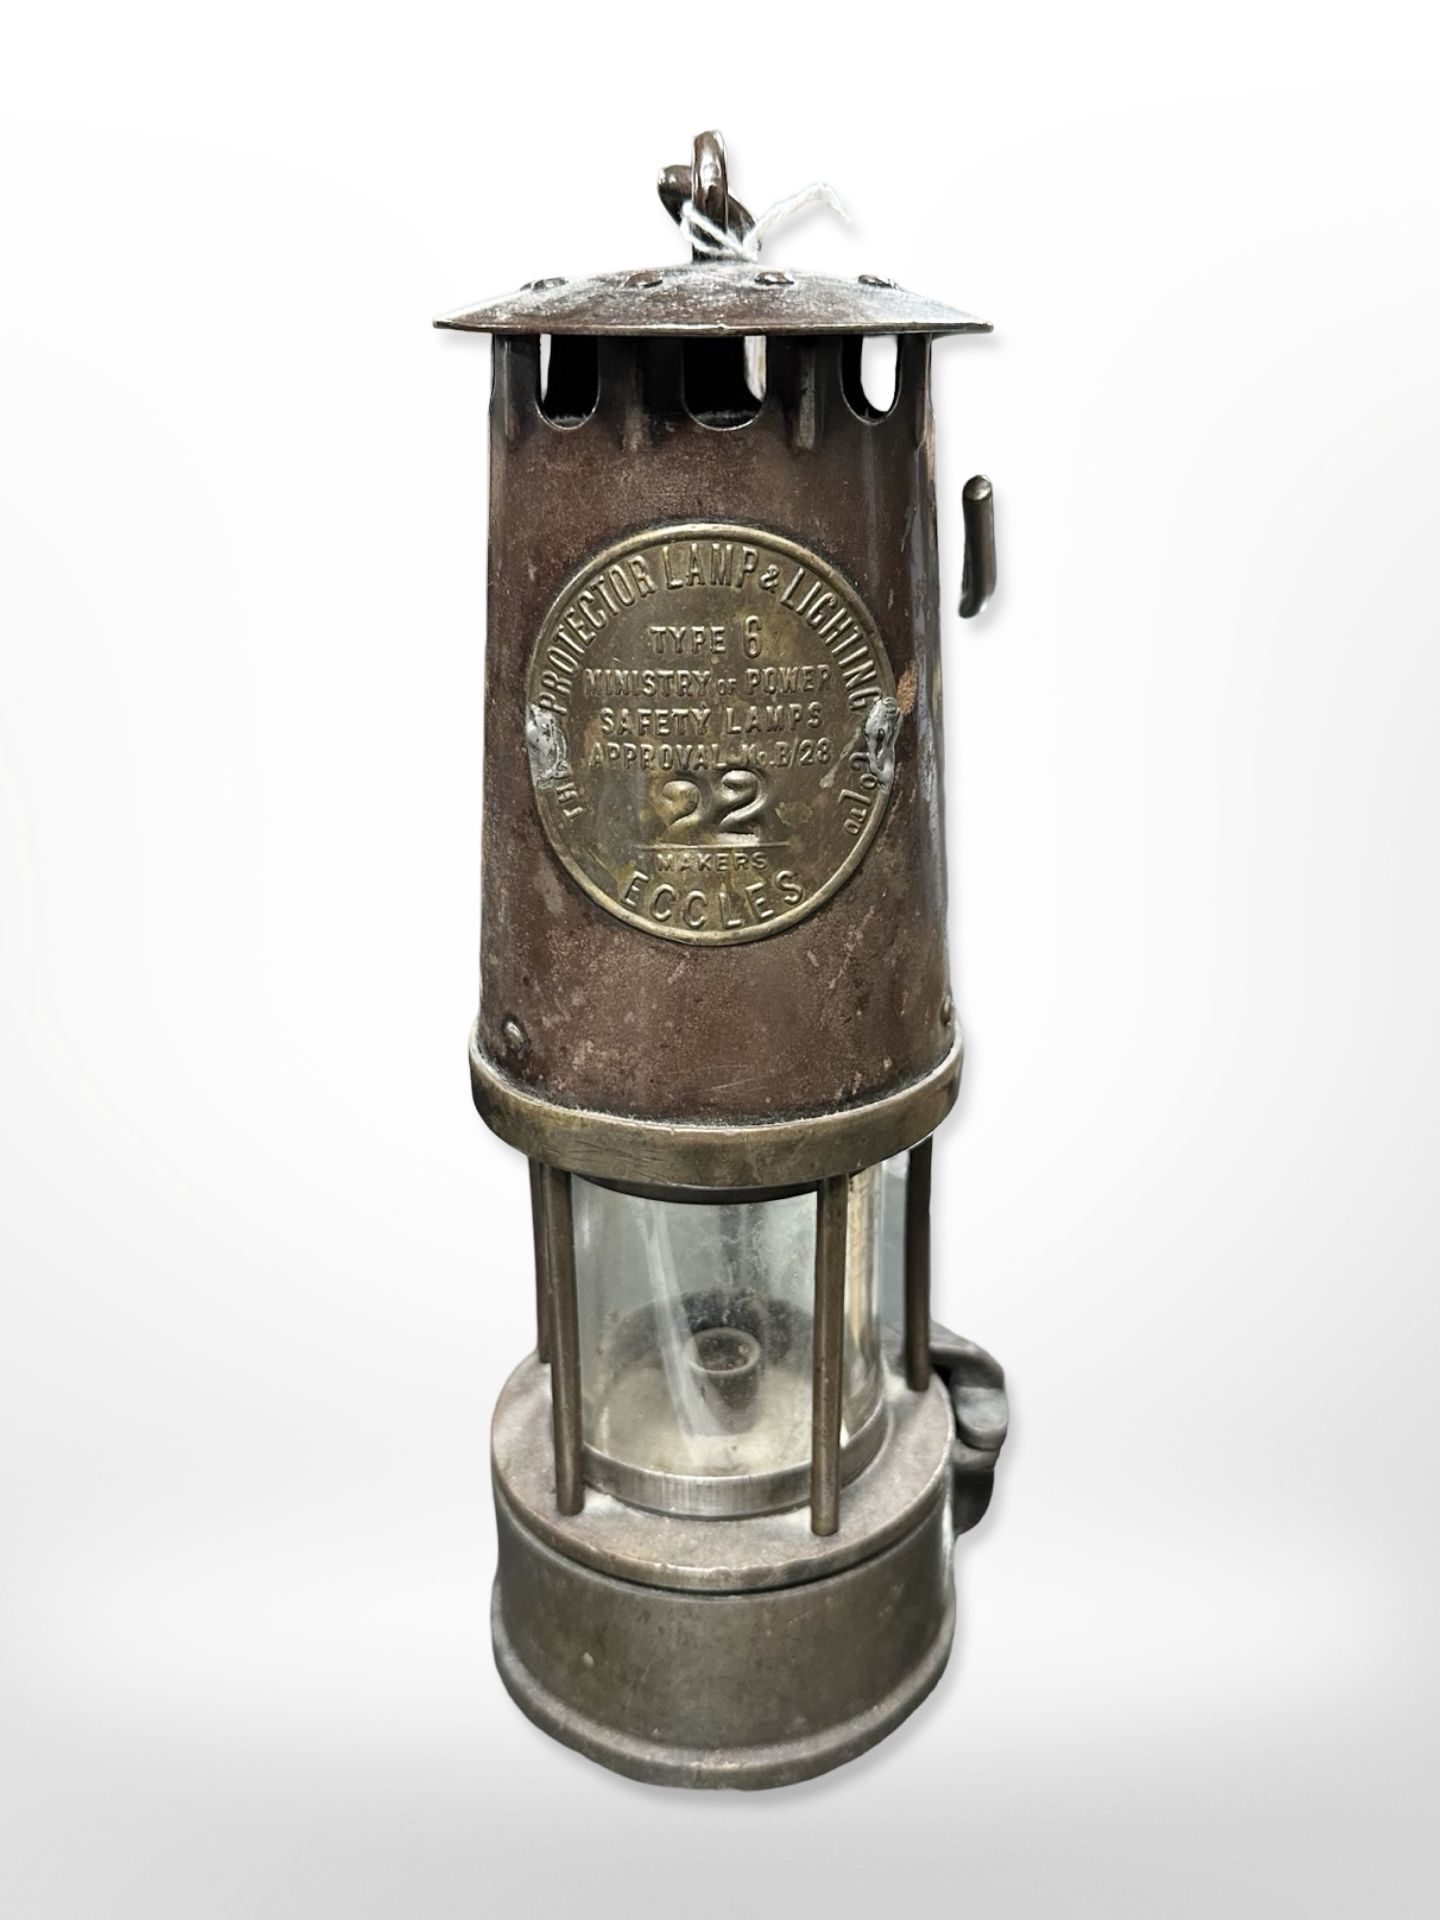 An Eccles protector miner's lamp type 6.